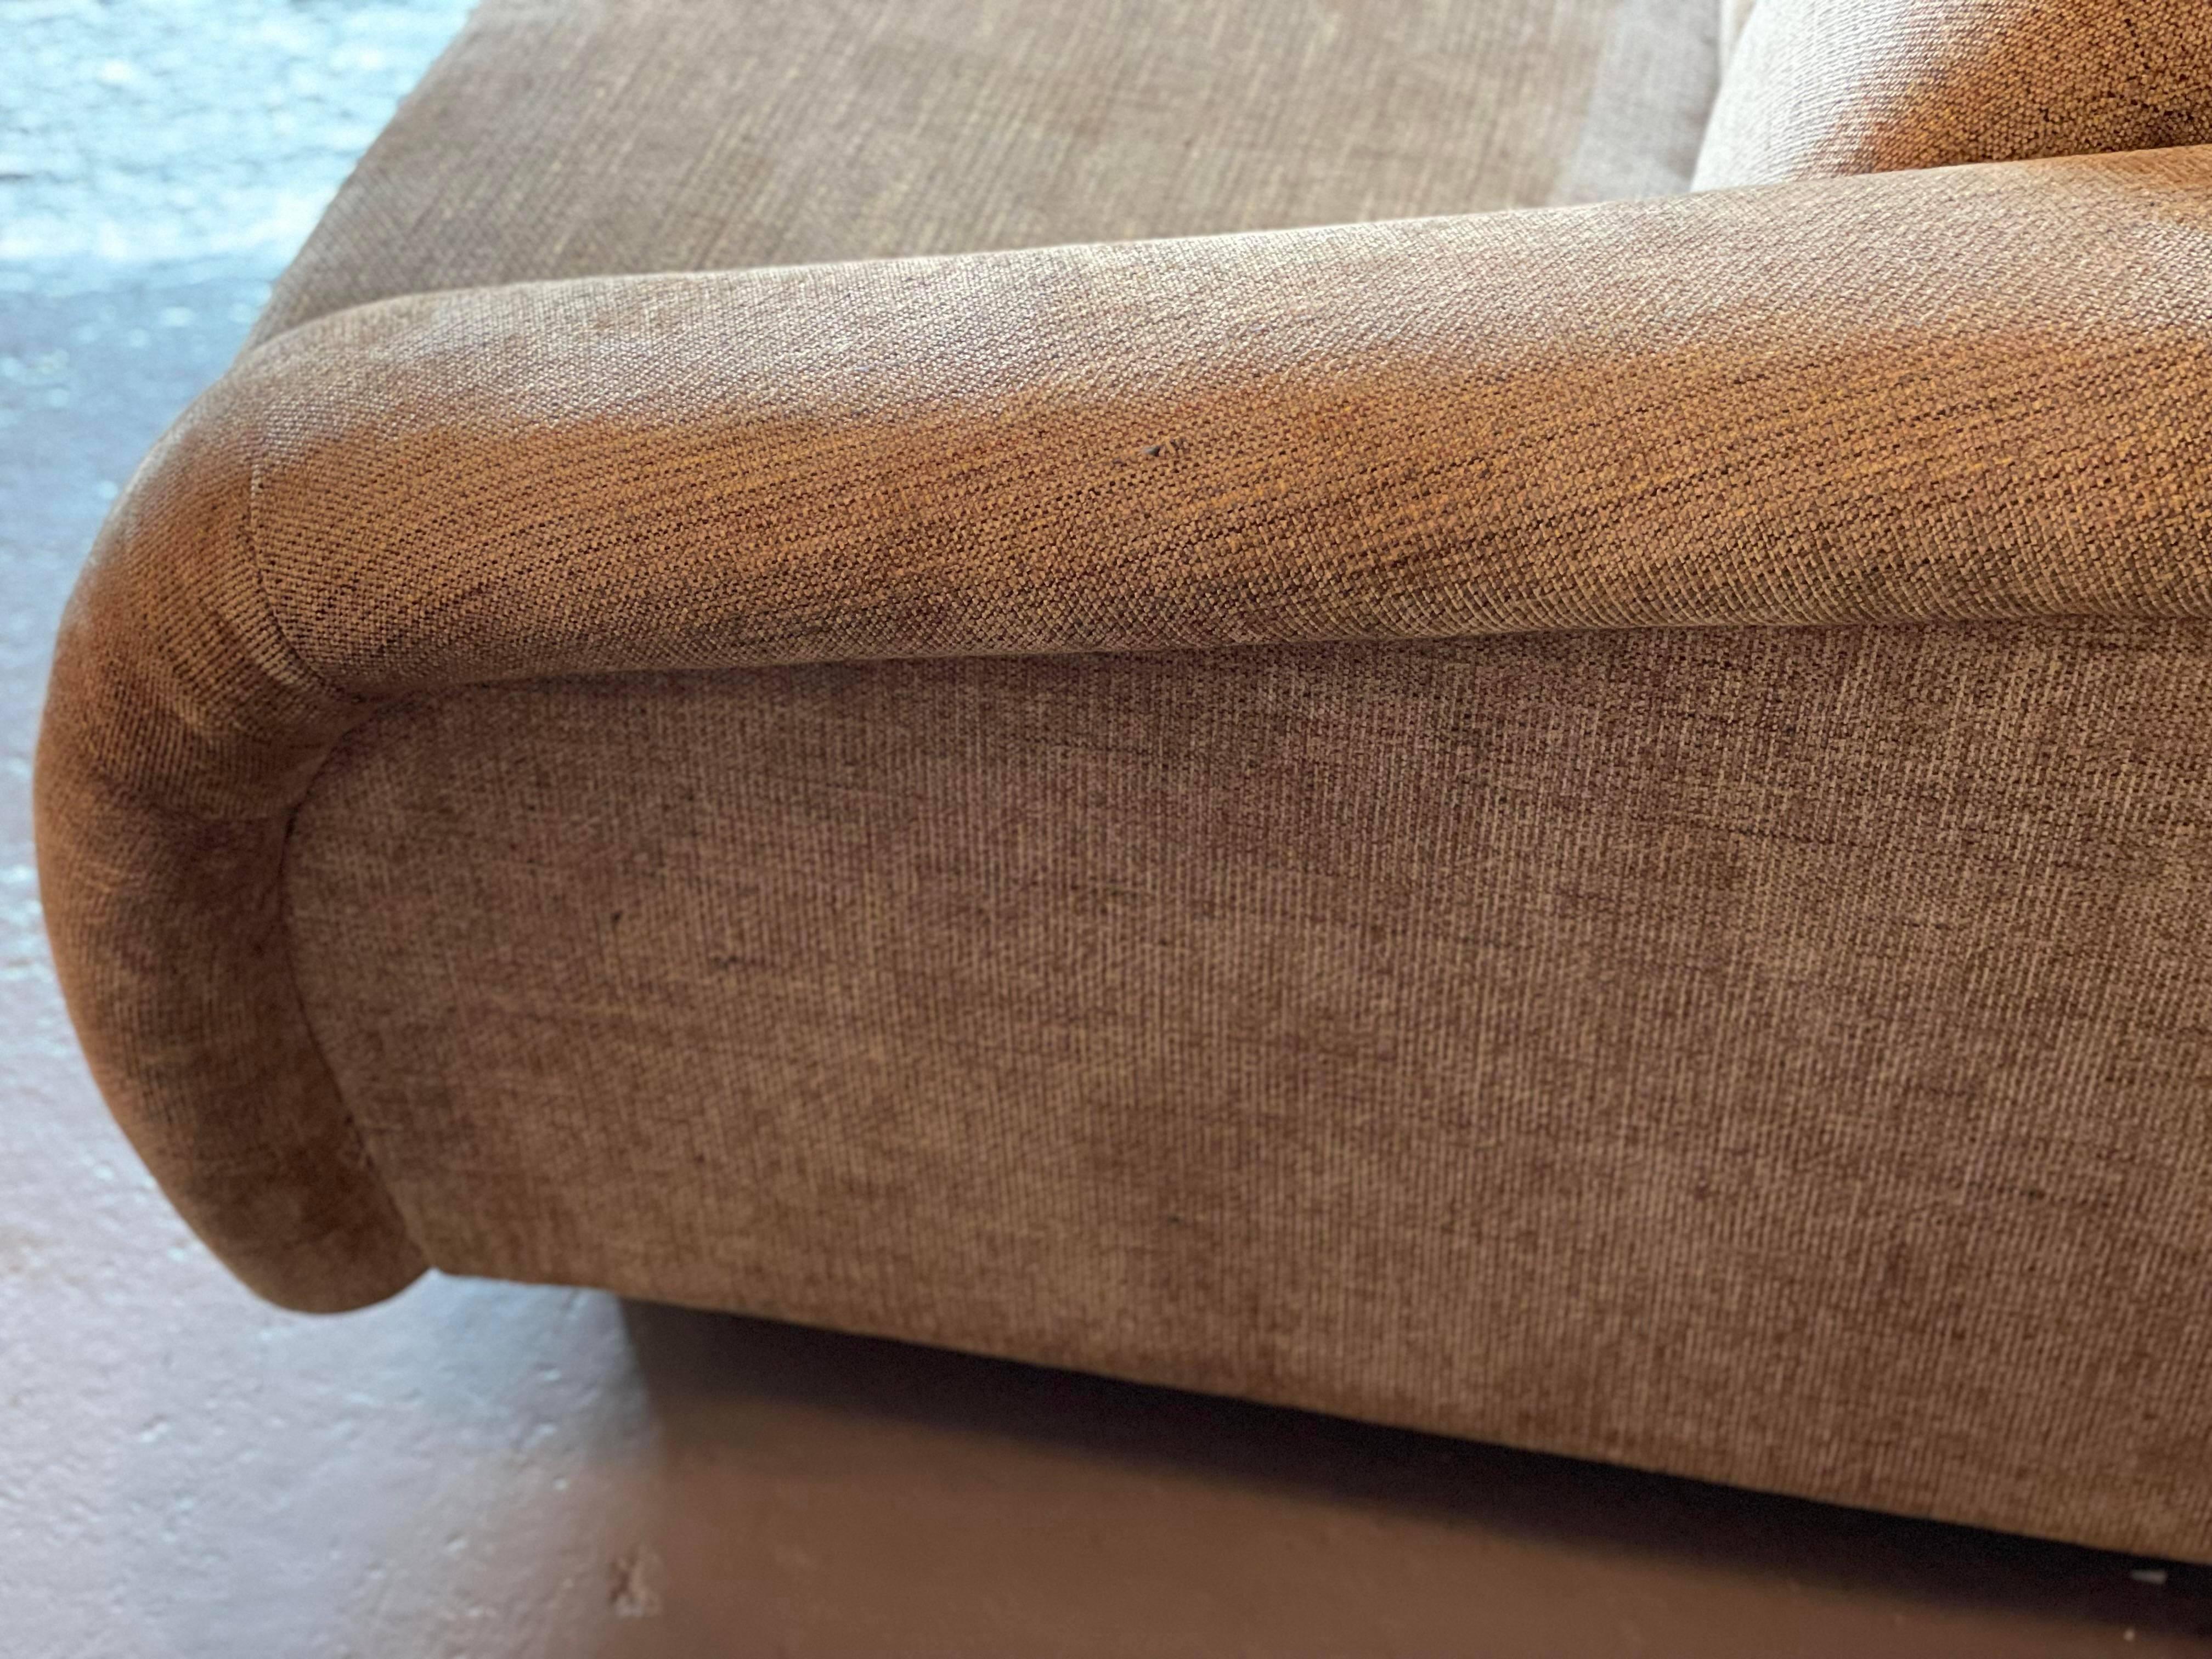 Post-Modern 1980s Vintage Directional Sofa in Tan Upholstery